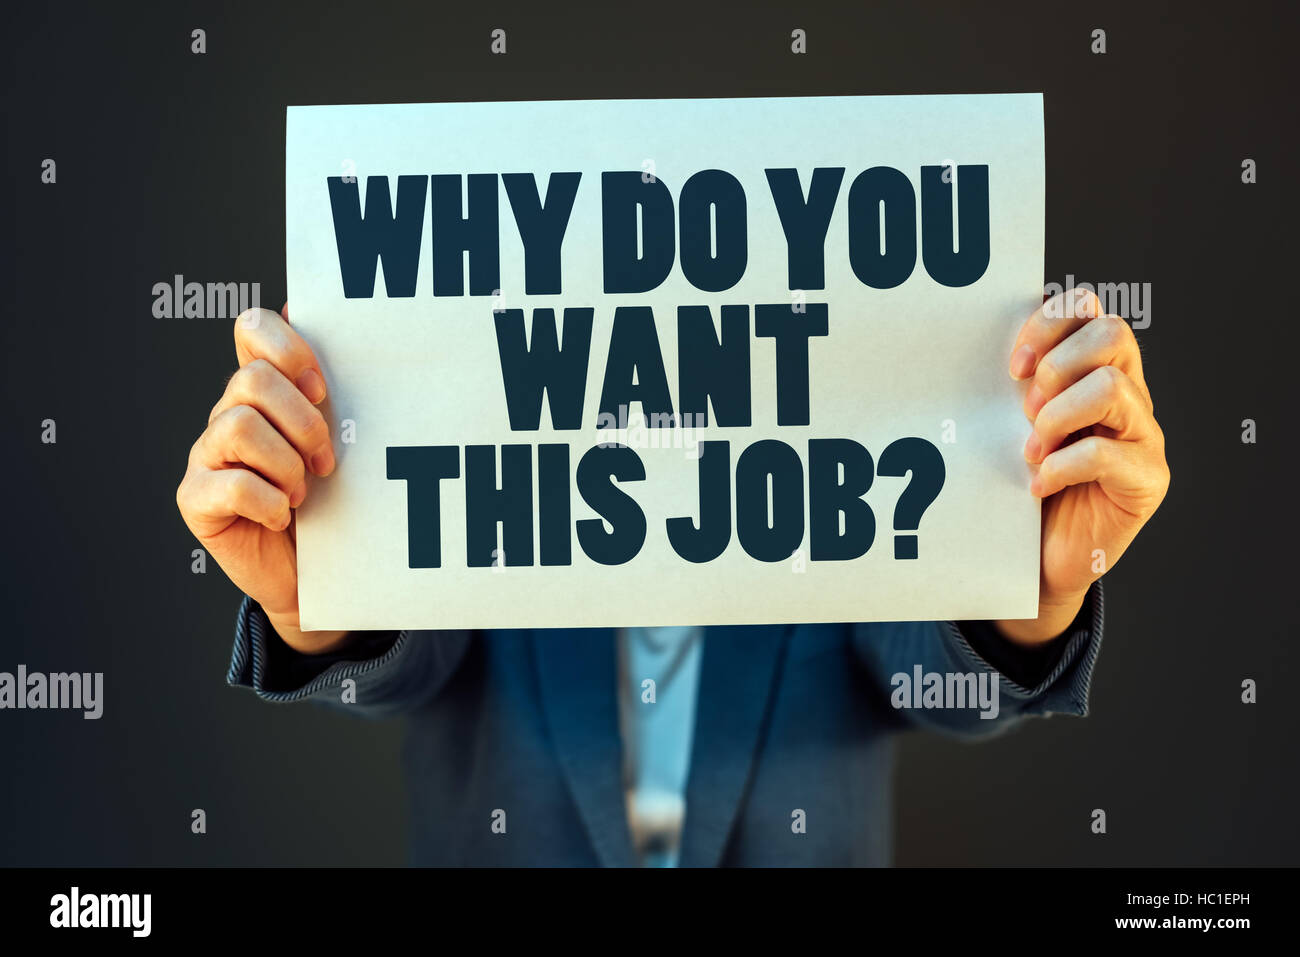 Why do you want this job question printed on paper held by business woman Stock Photo